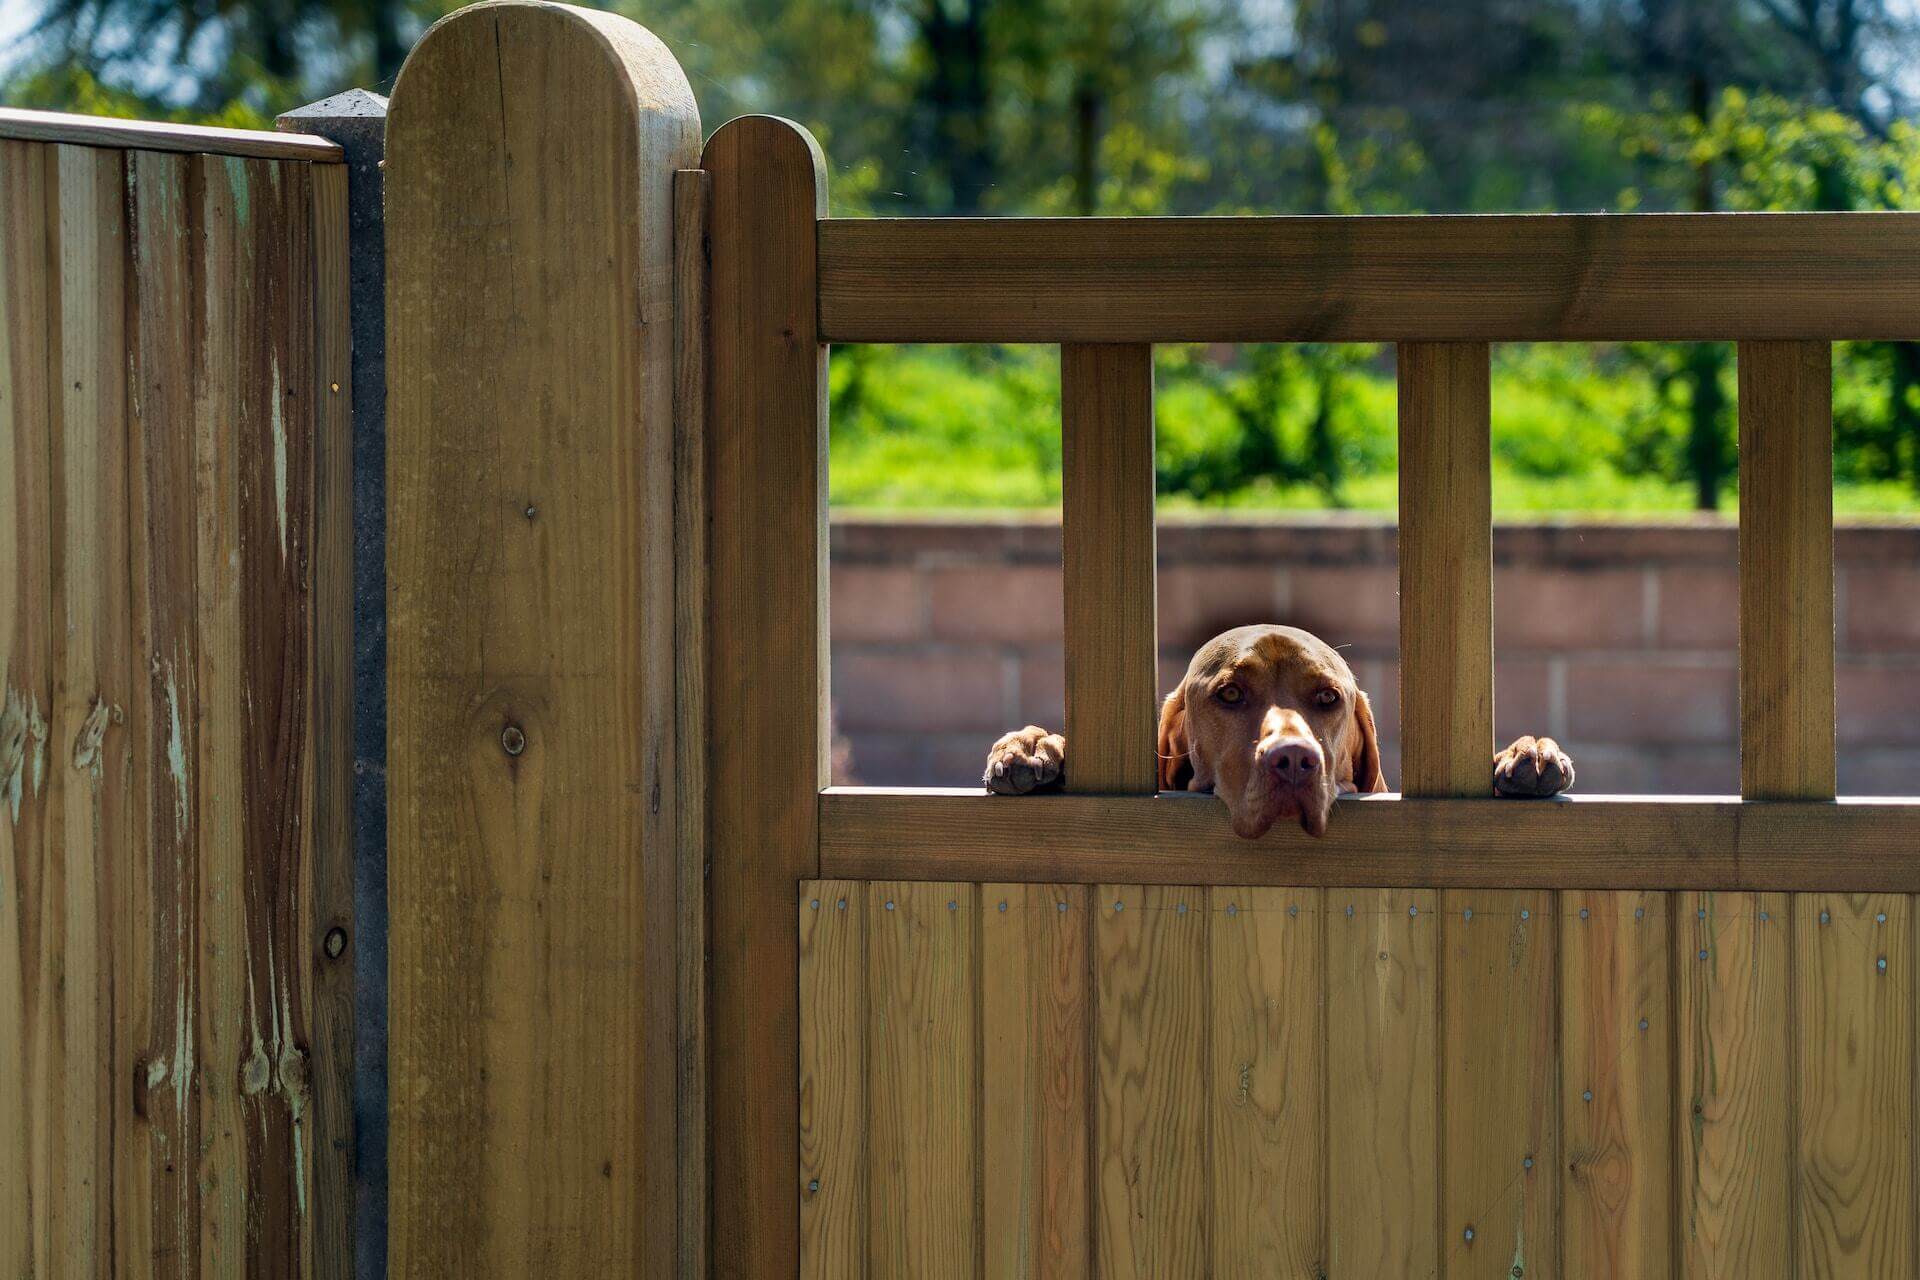 What to Consider When Building a Dog Fence